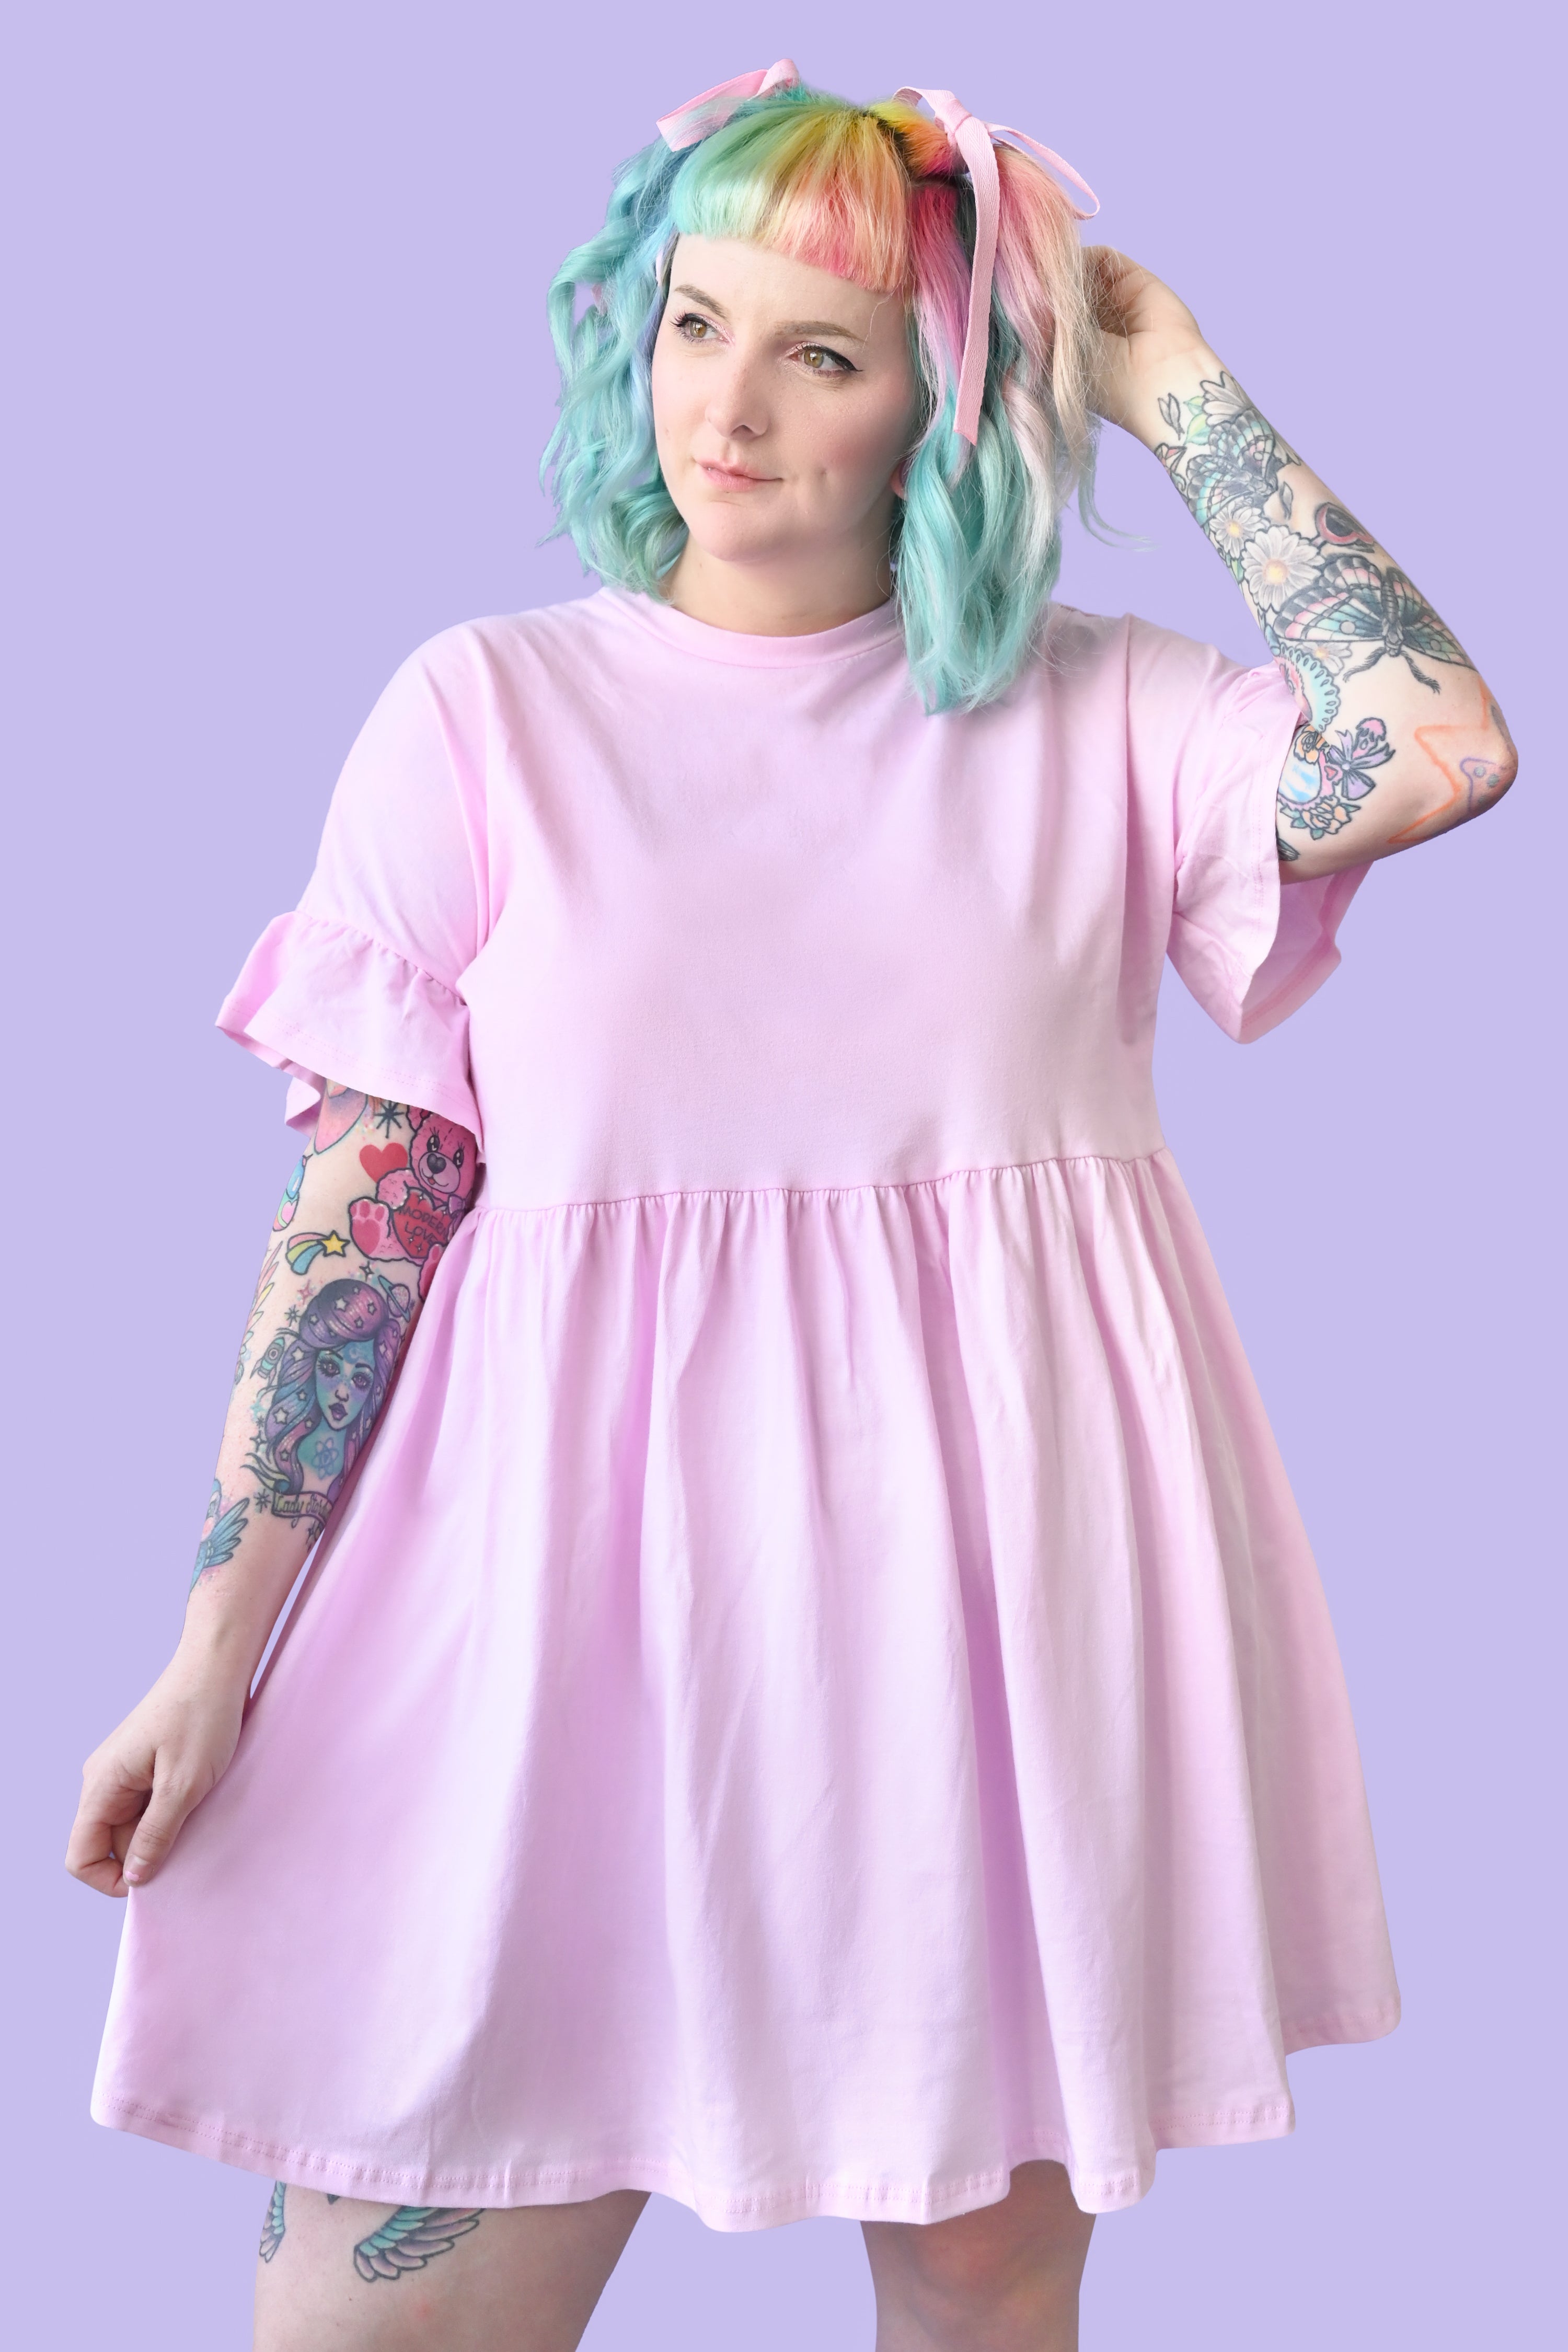 Light pink colored loose fitting cotton dress with ruffled sleeves